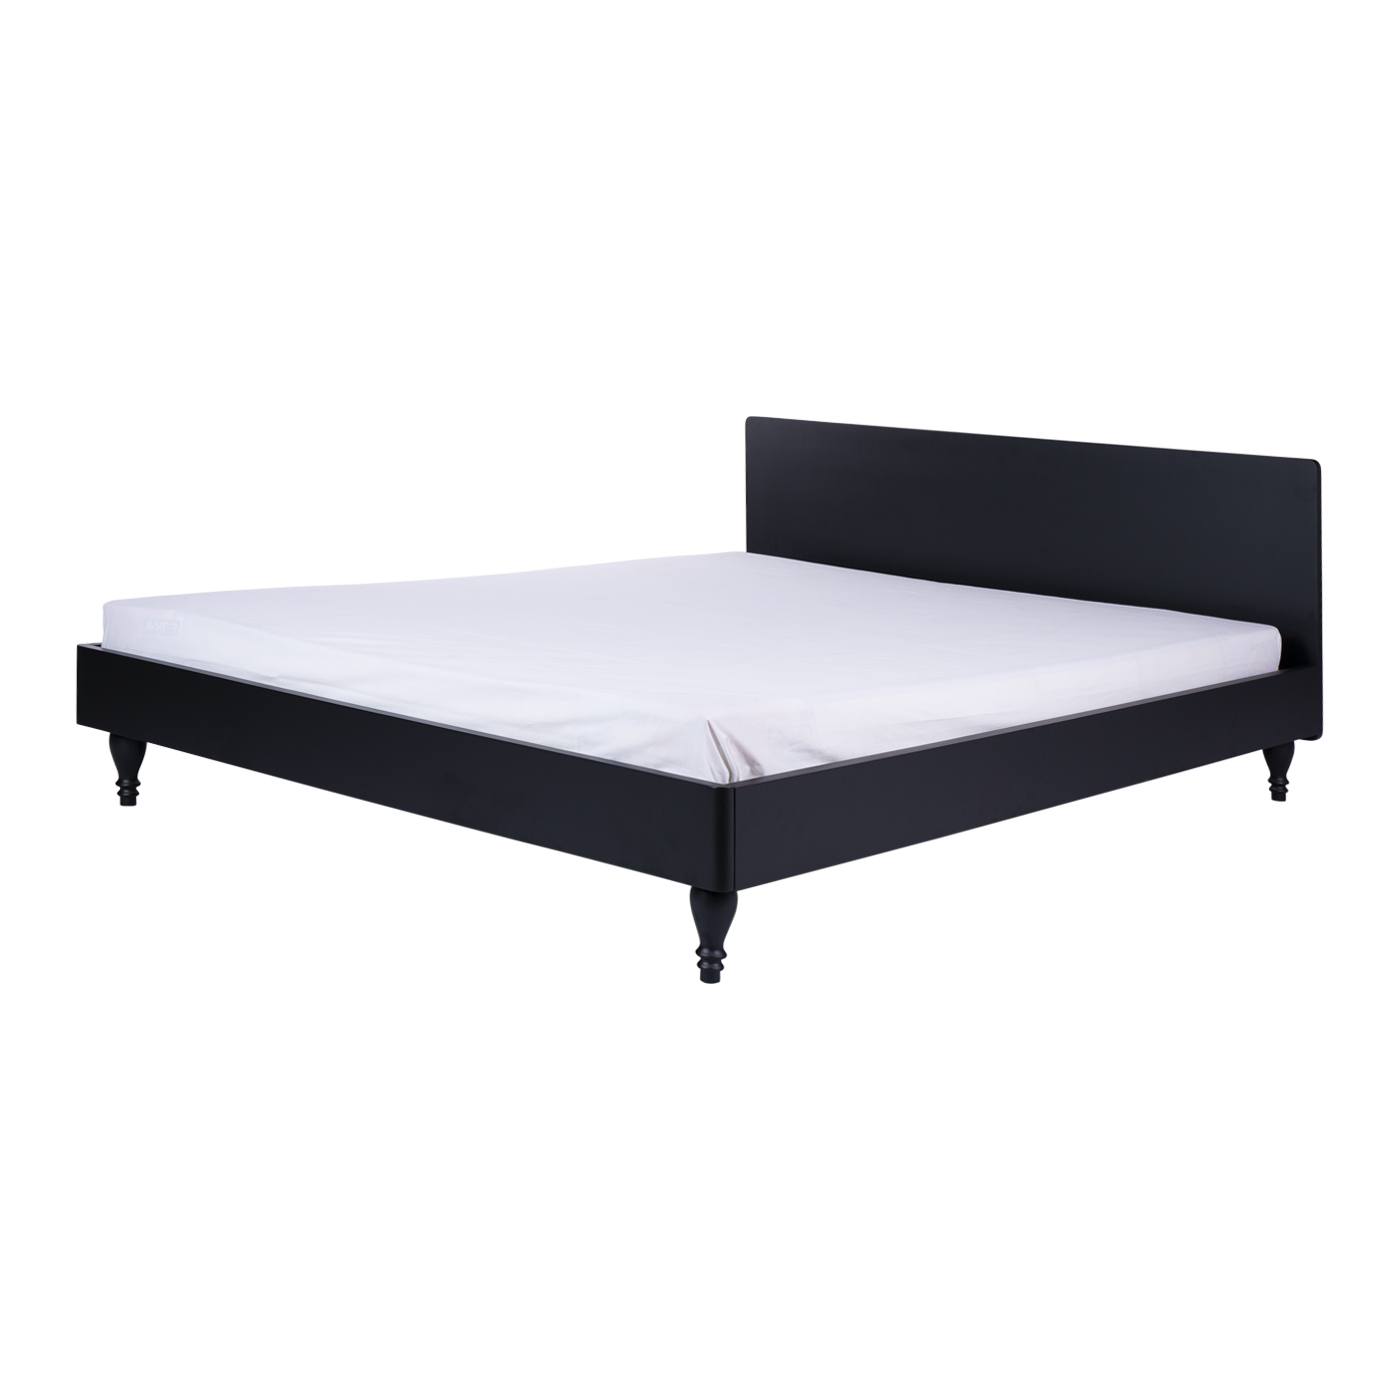 Rosewall King Bed